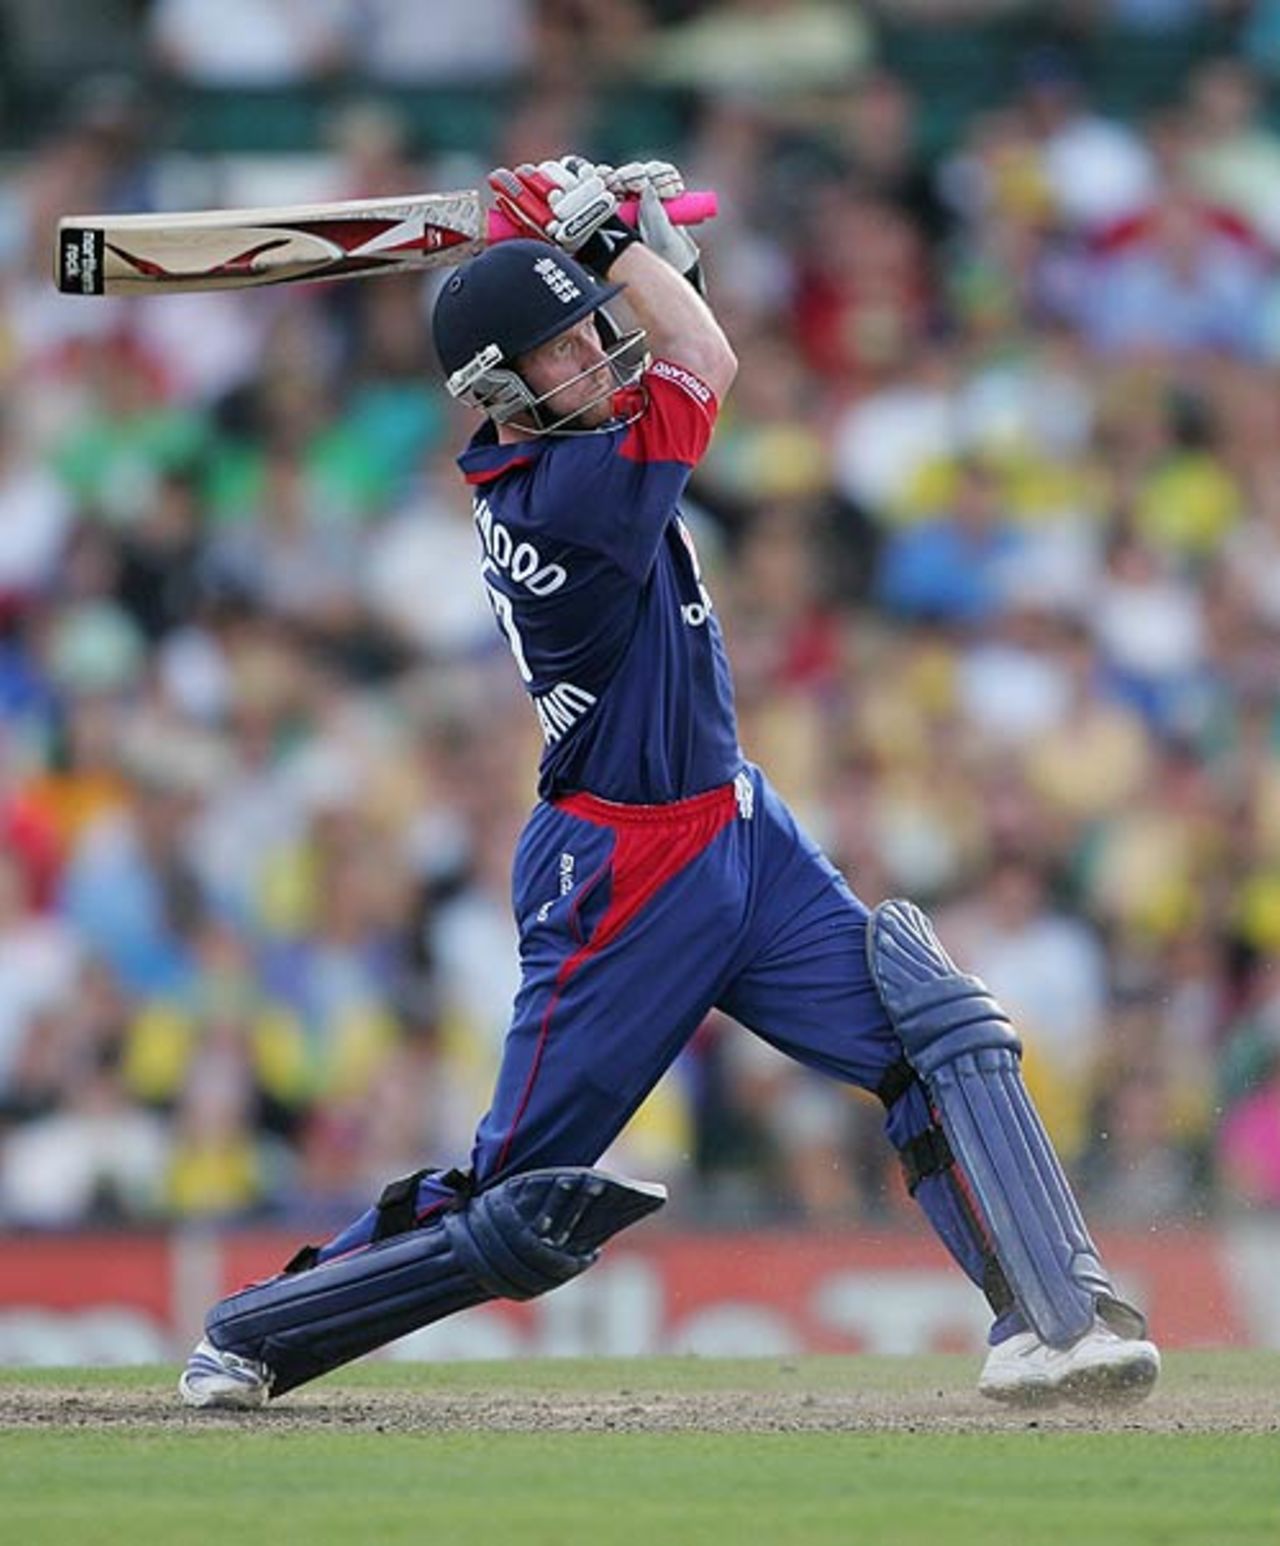 Paul Collingwood launches a big drive during his innings of 70, Australia v England, CB Series, 2nd final, Sydney, February 11, 2007